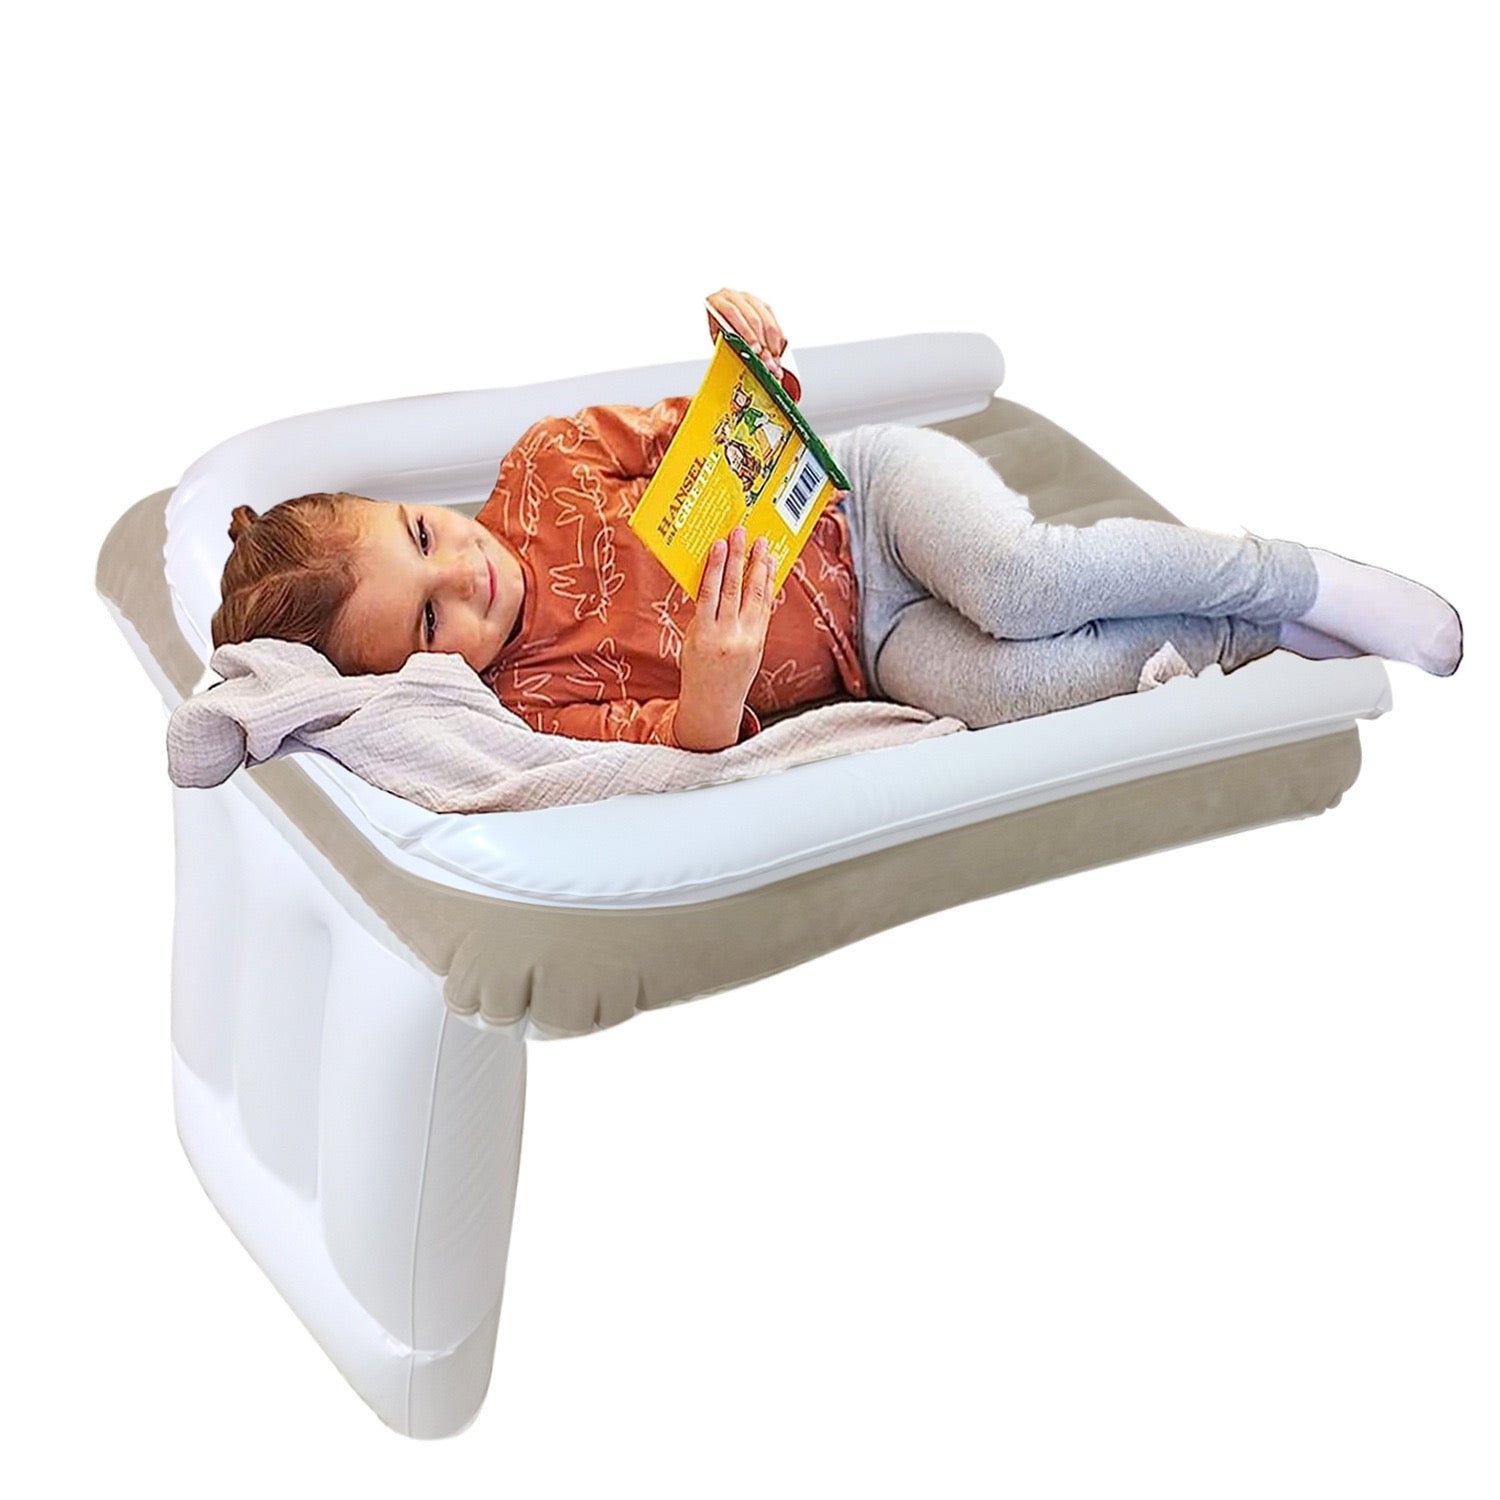 girl enjoying reading by lying in air bed